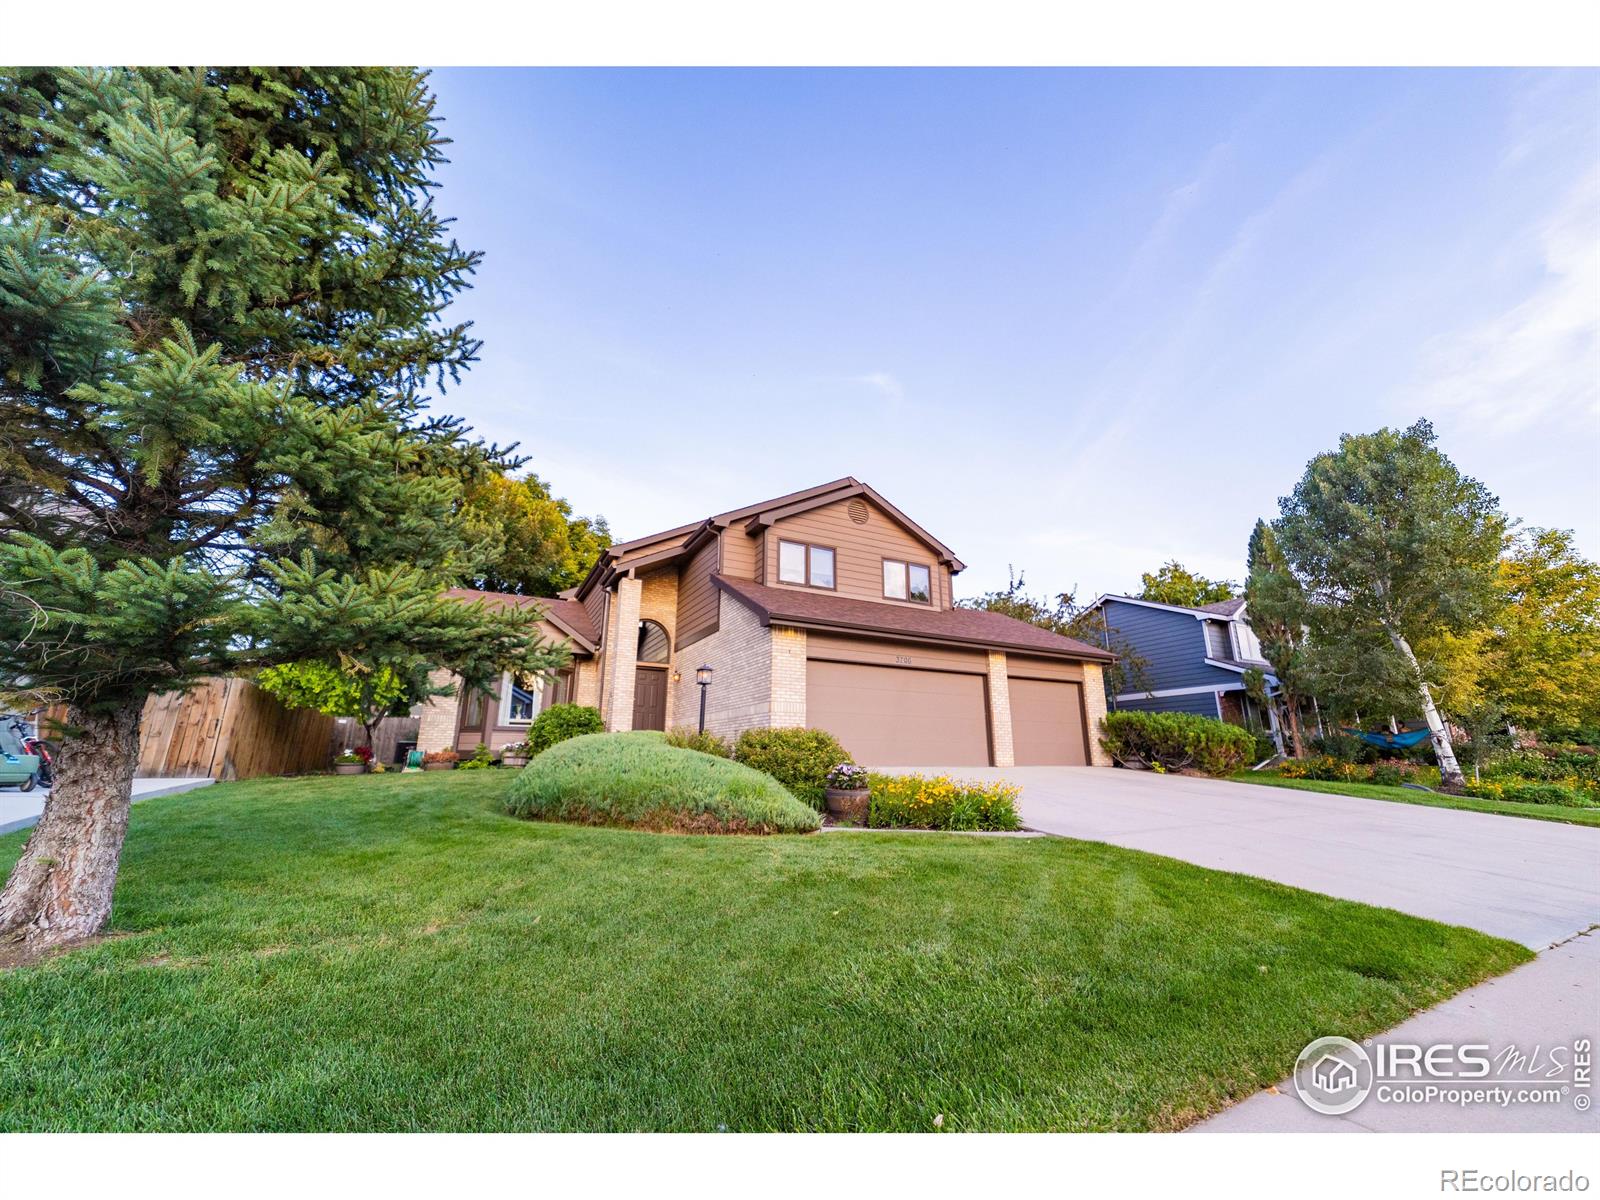 3706  Bromley Drive, fort collins MLS: 456789999270 Beds: 4 Baths: 4 Price: $775,000